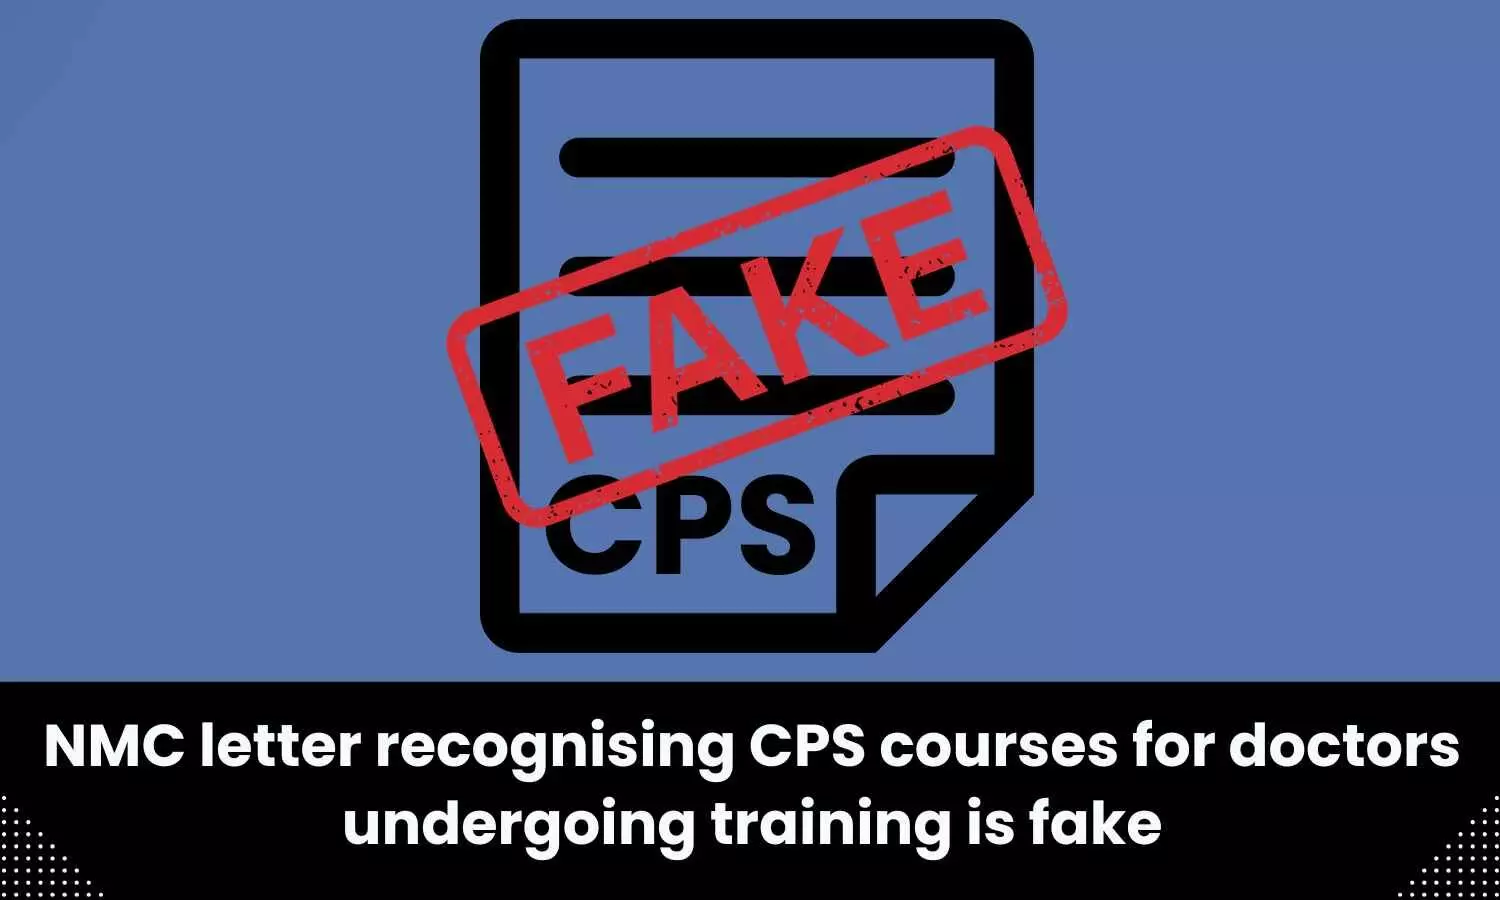 Fact Check: NMC letter recognising CPS courses for doctors undergoing training is fake